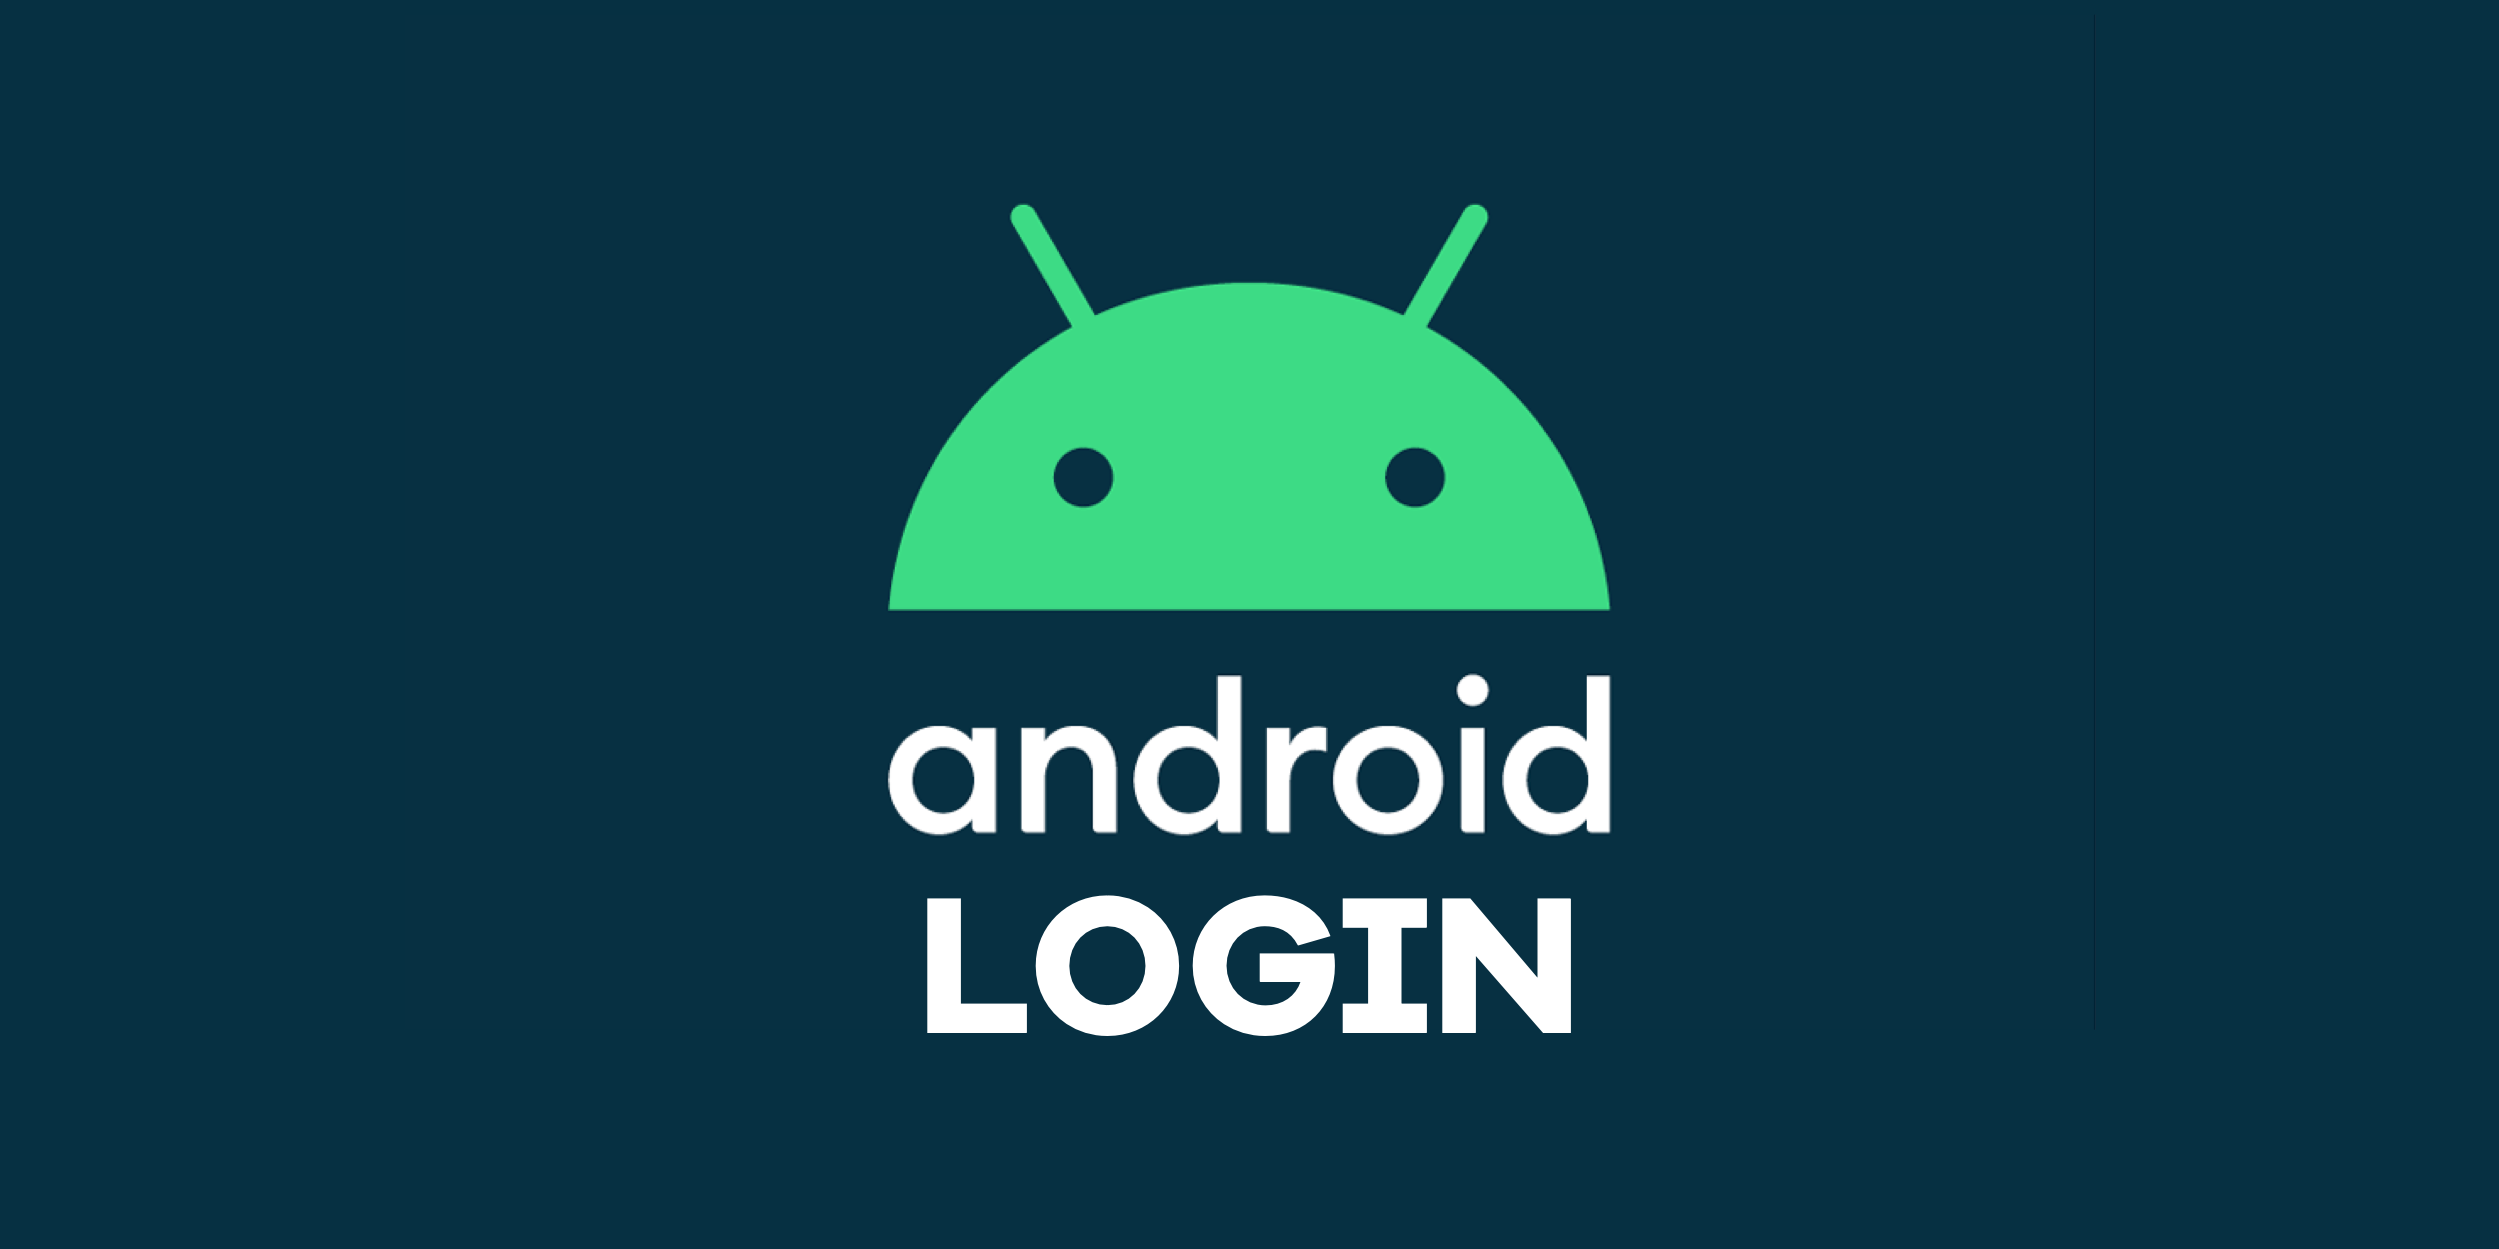 Android Login Made Easy with OIDC